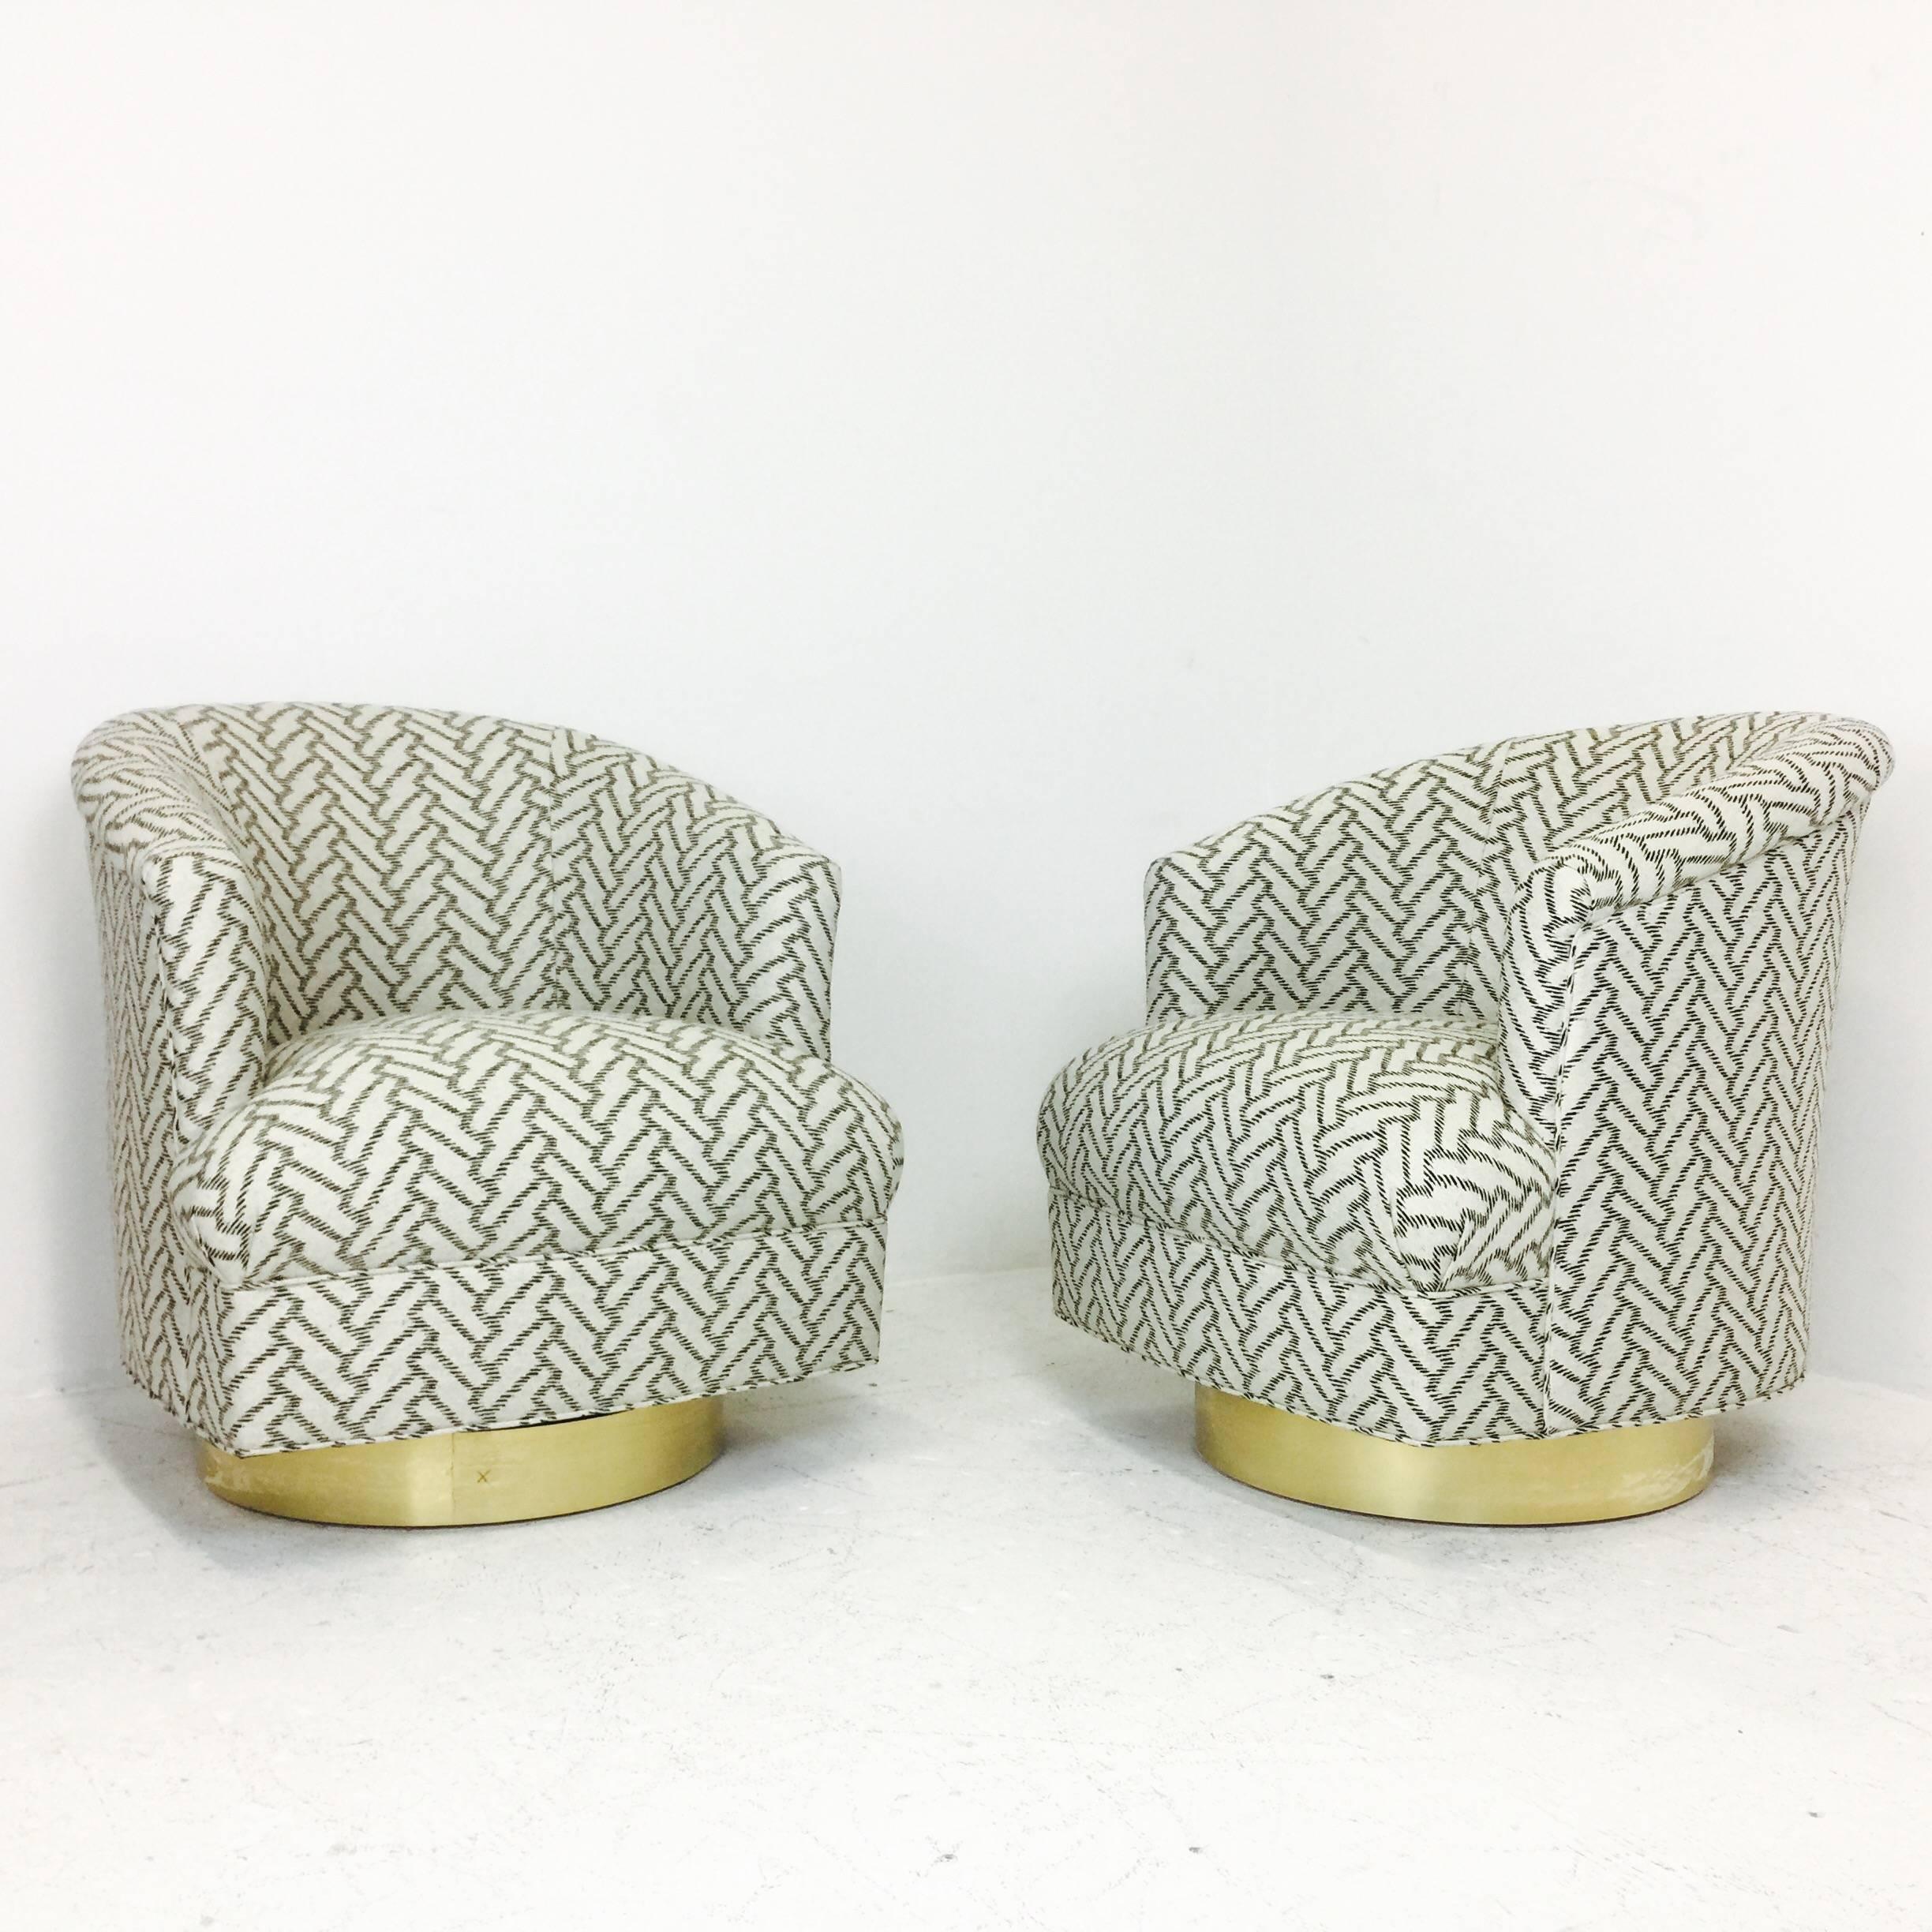 These stunning swivel chairs were newly upholstered in a white and black herringbone pattern and new bronze plinths were added for touch of glamour.

Dimensions: 29